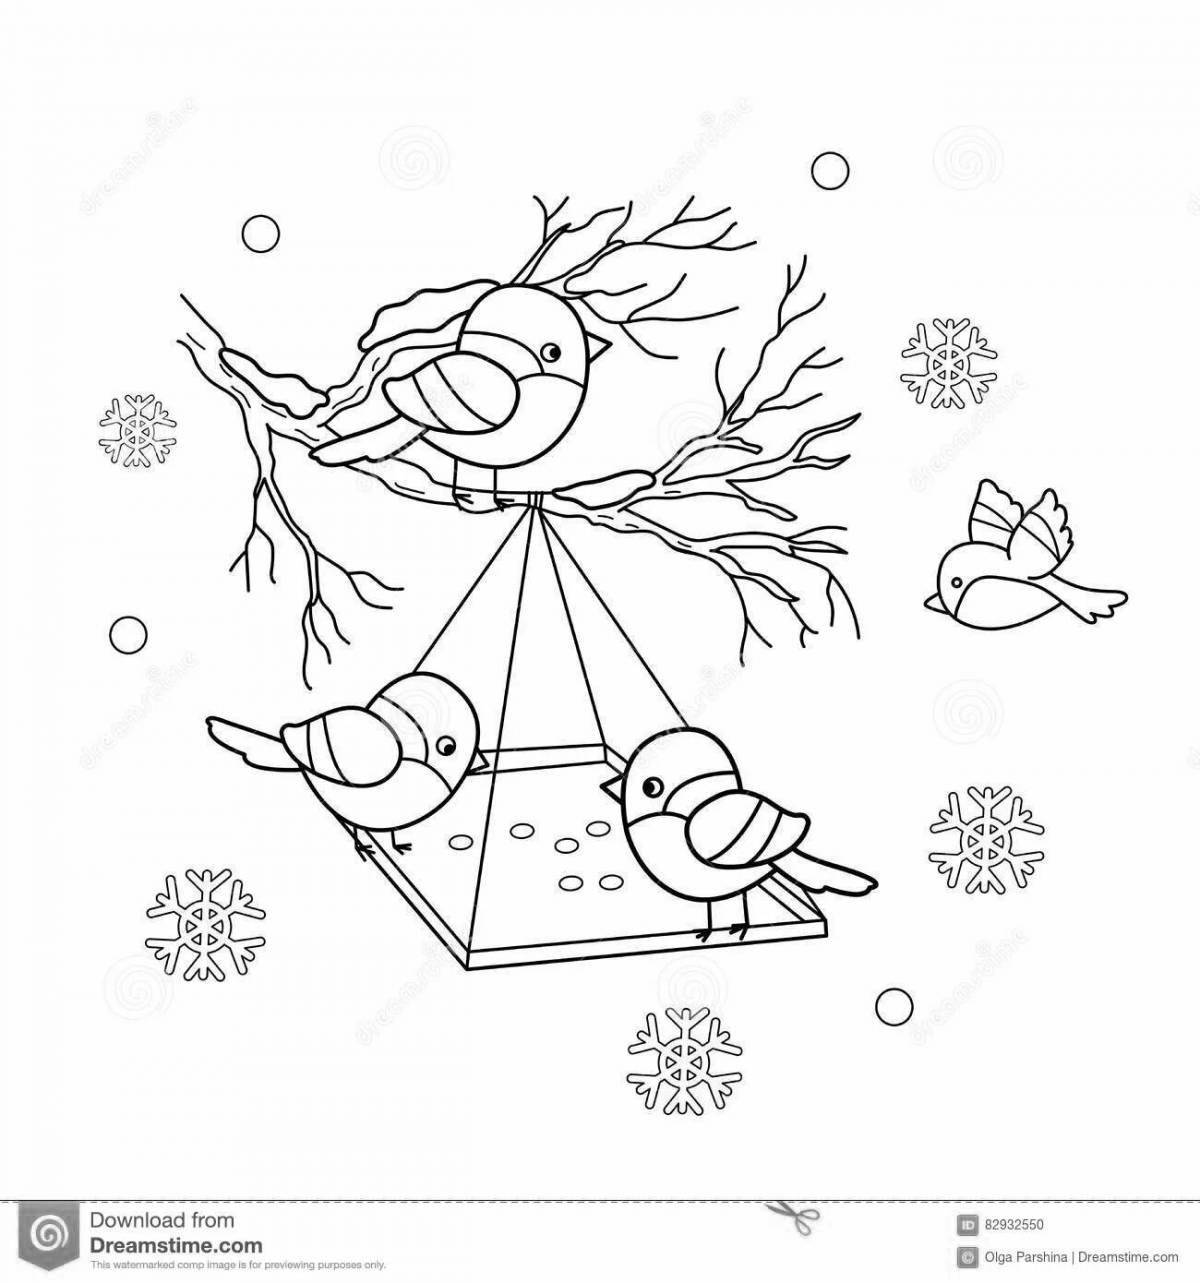 Colouring bright winter birds for kids